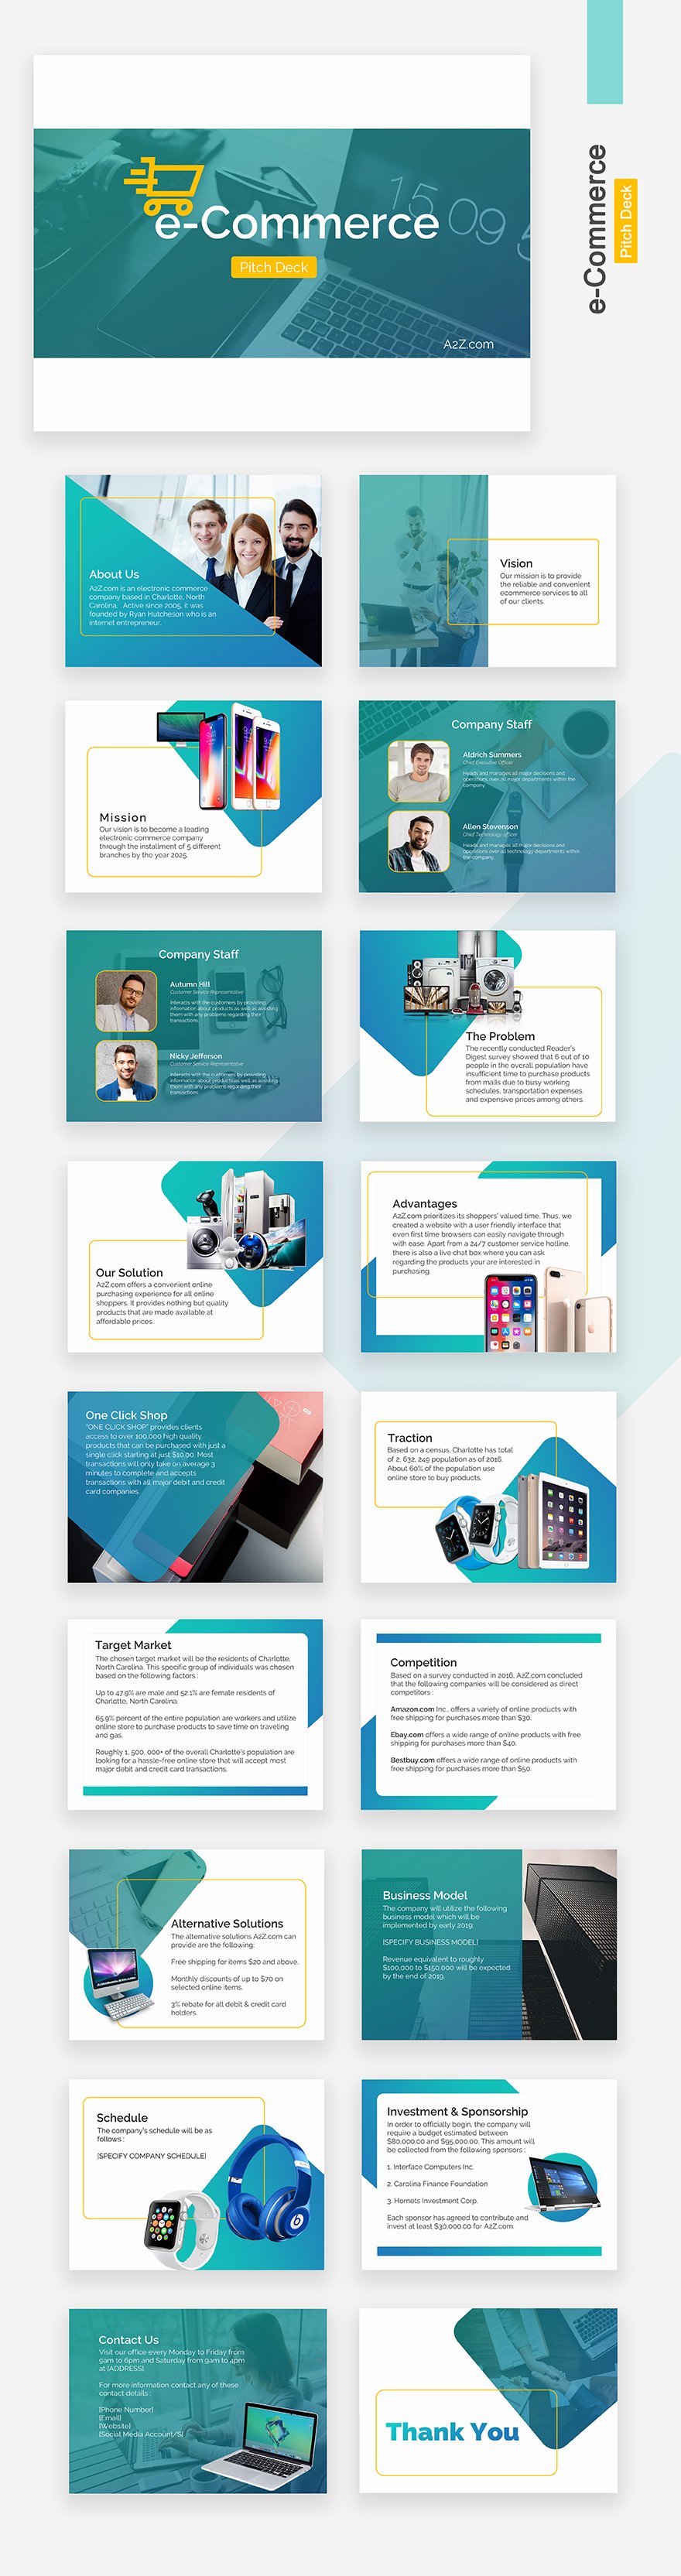 E-Commerce Pitch Deck Template